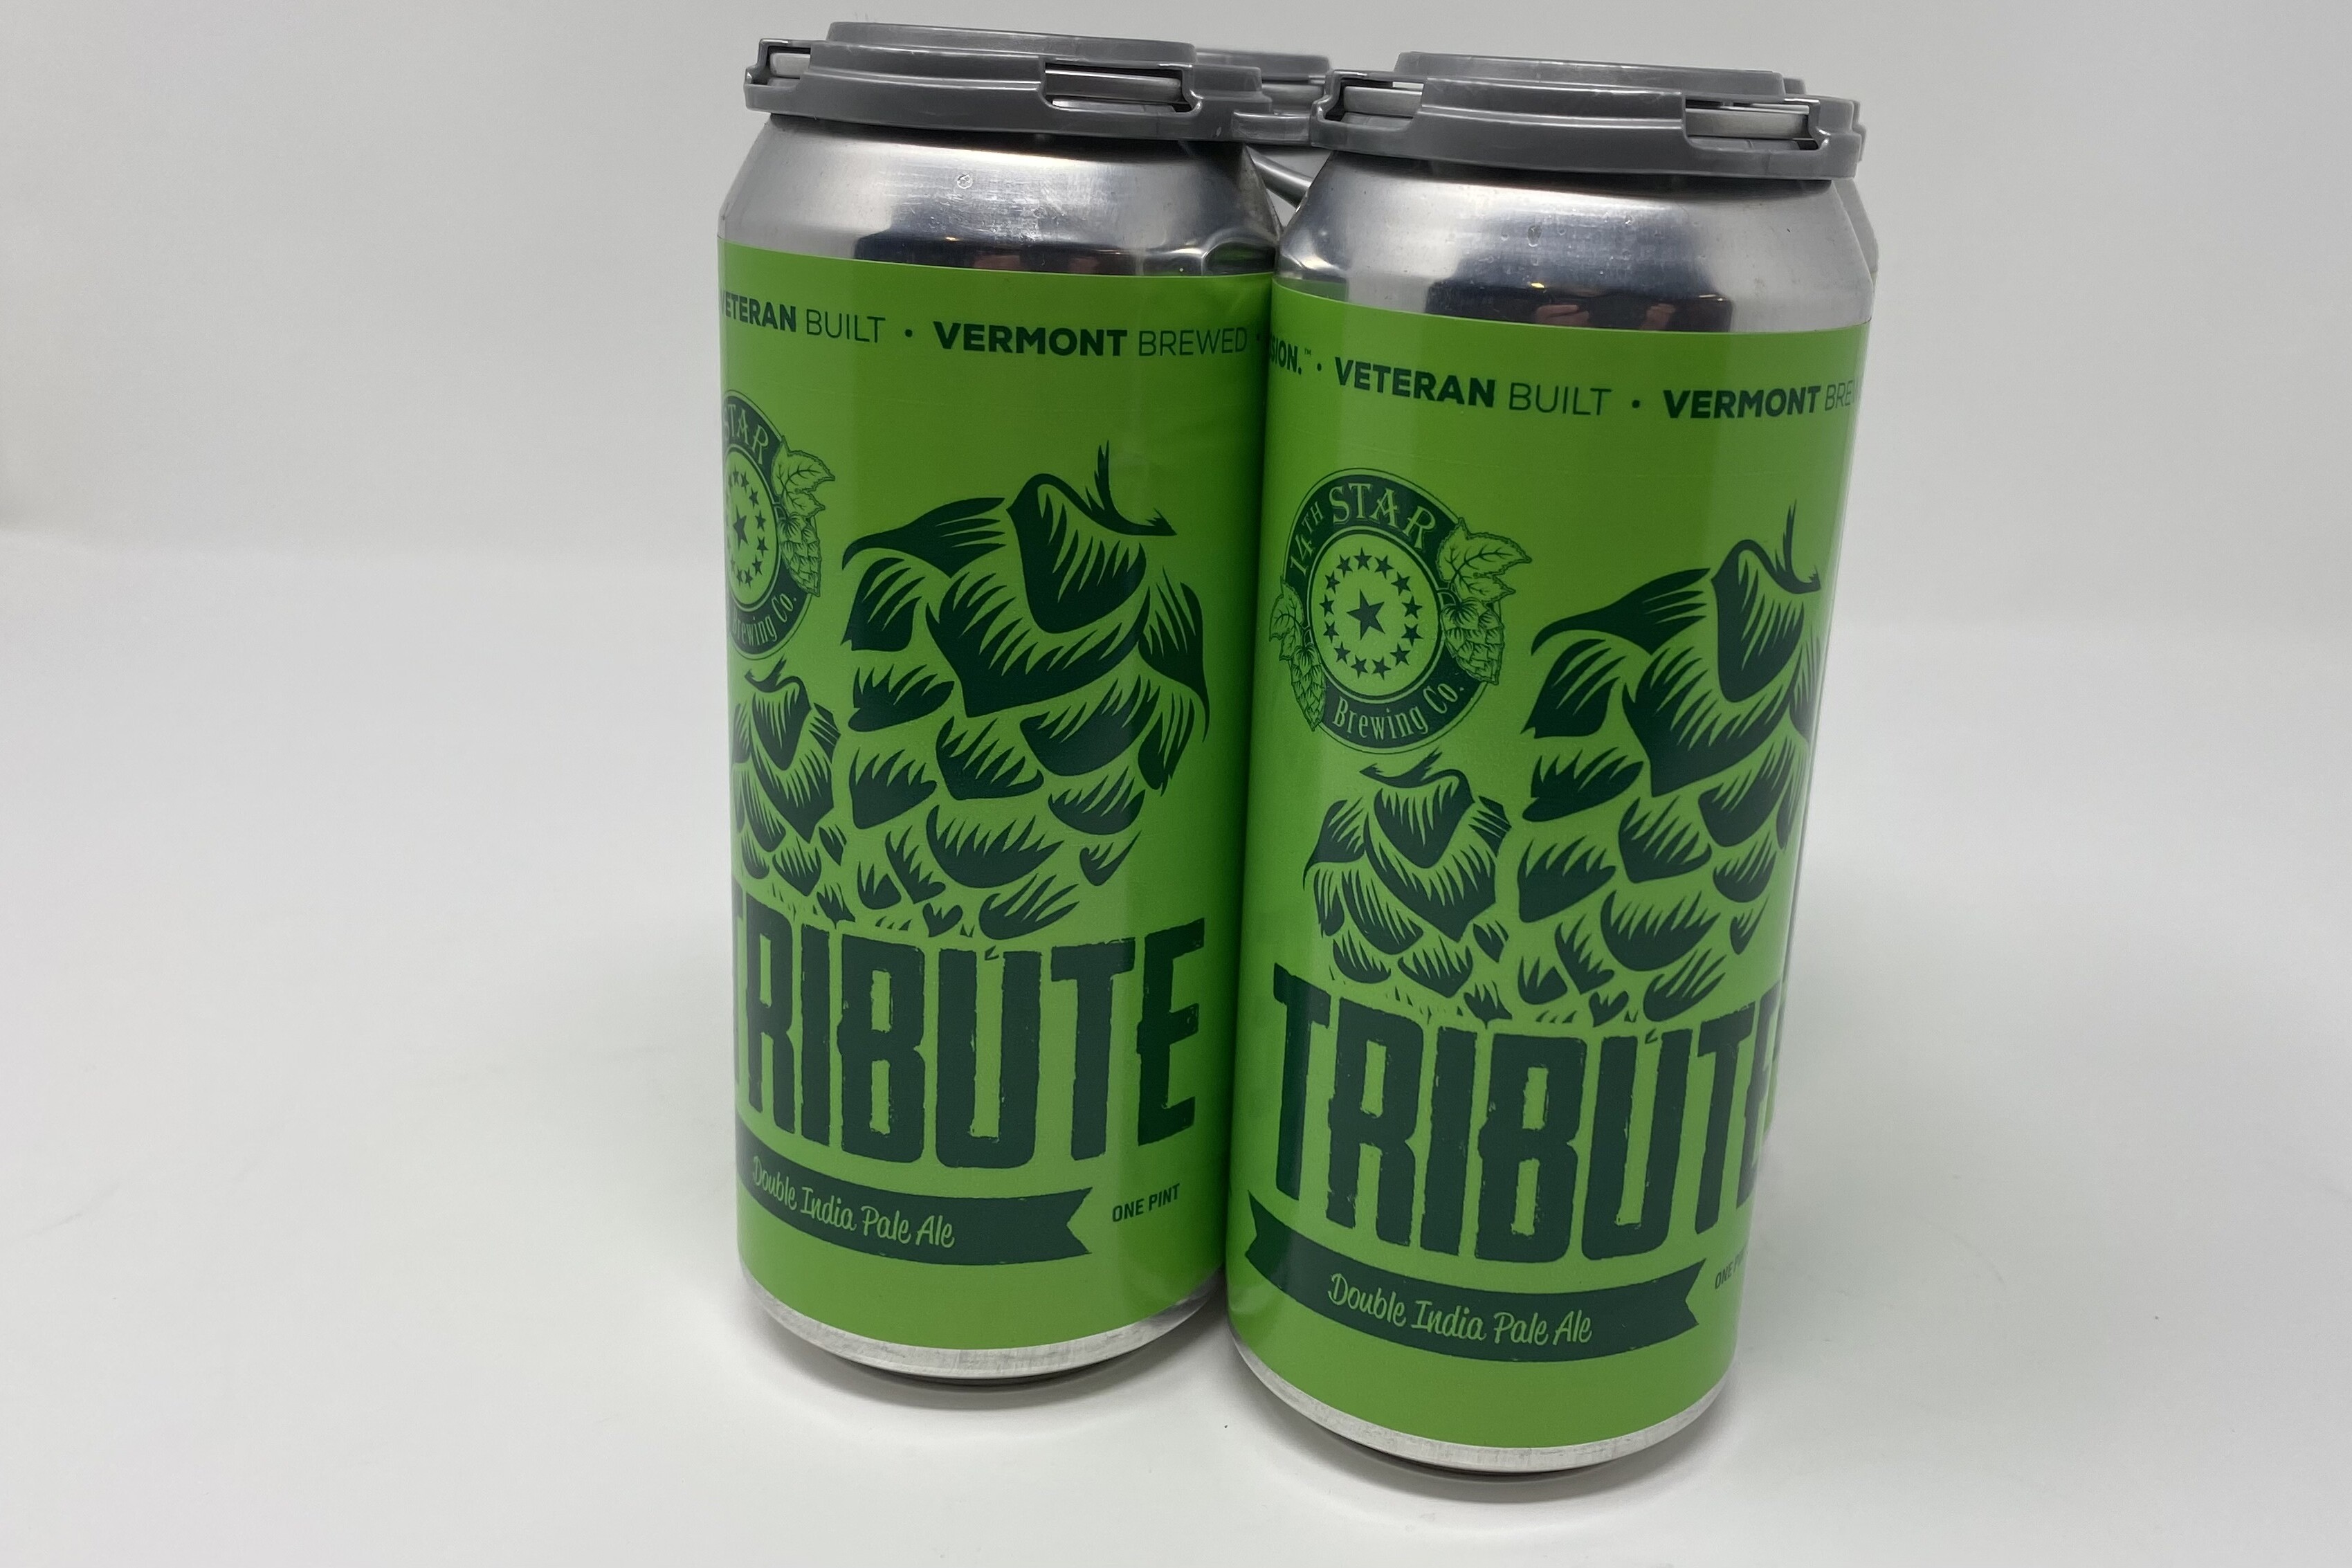 14th Star Brewing Company, Tribute Double IPA